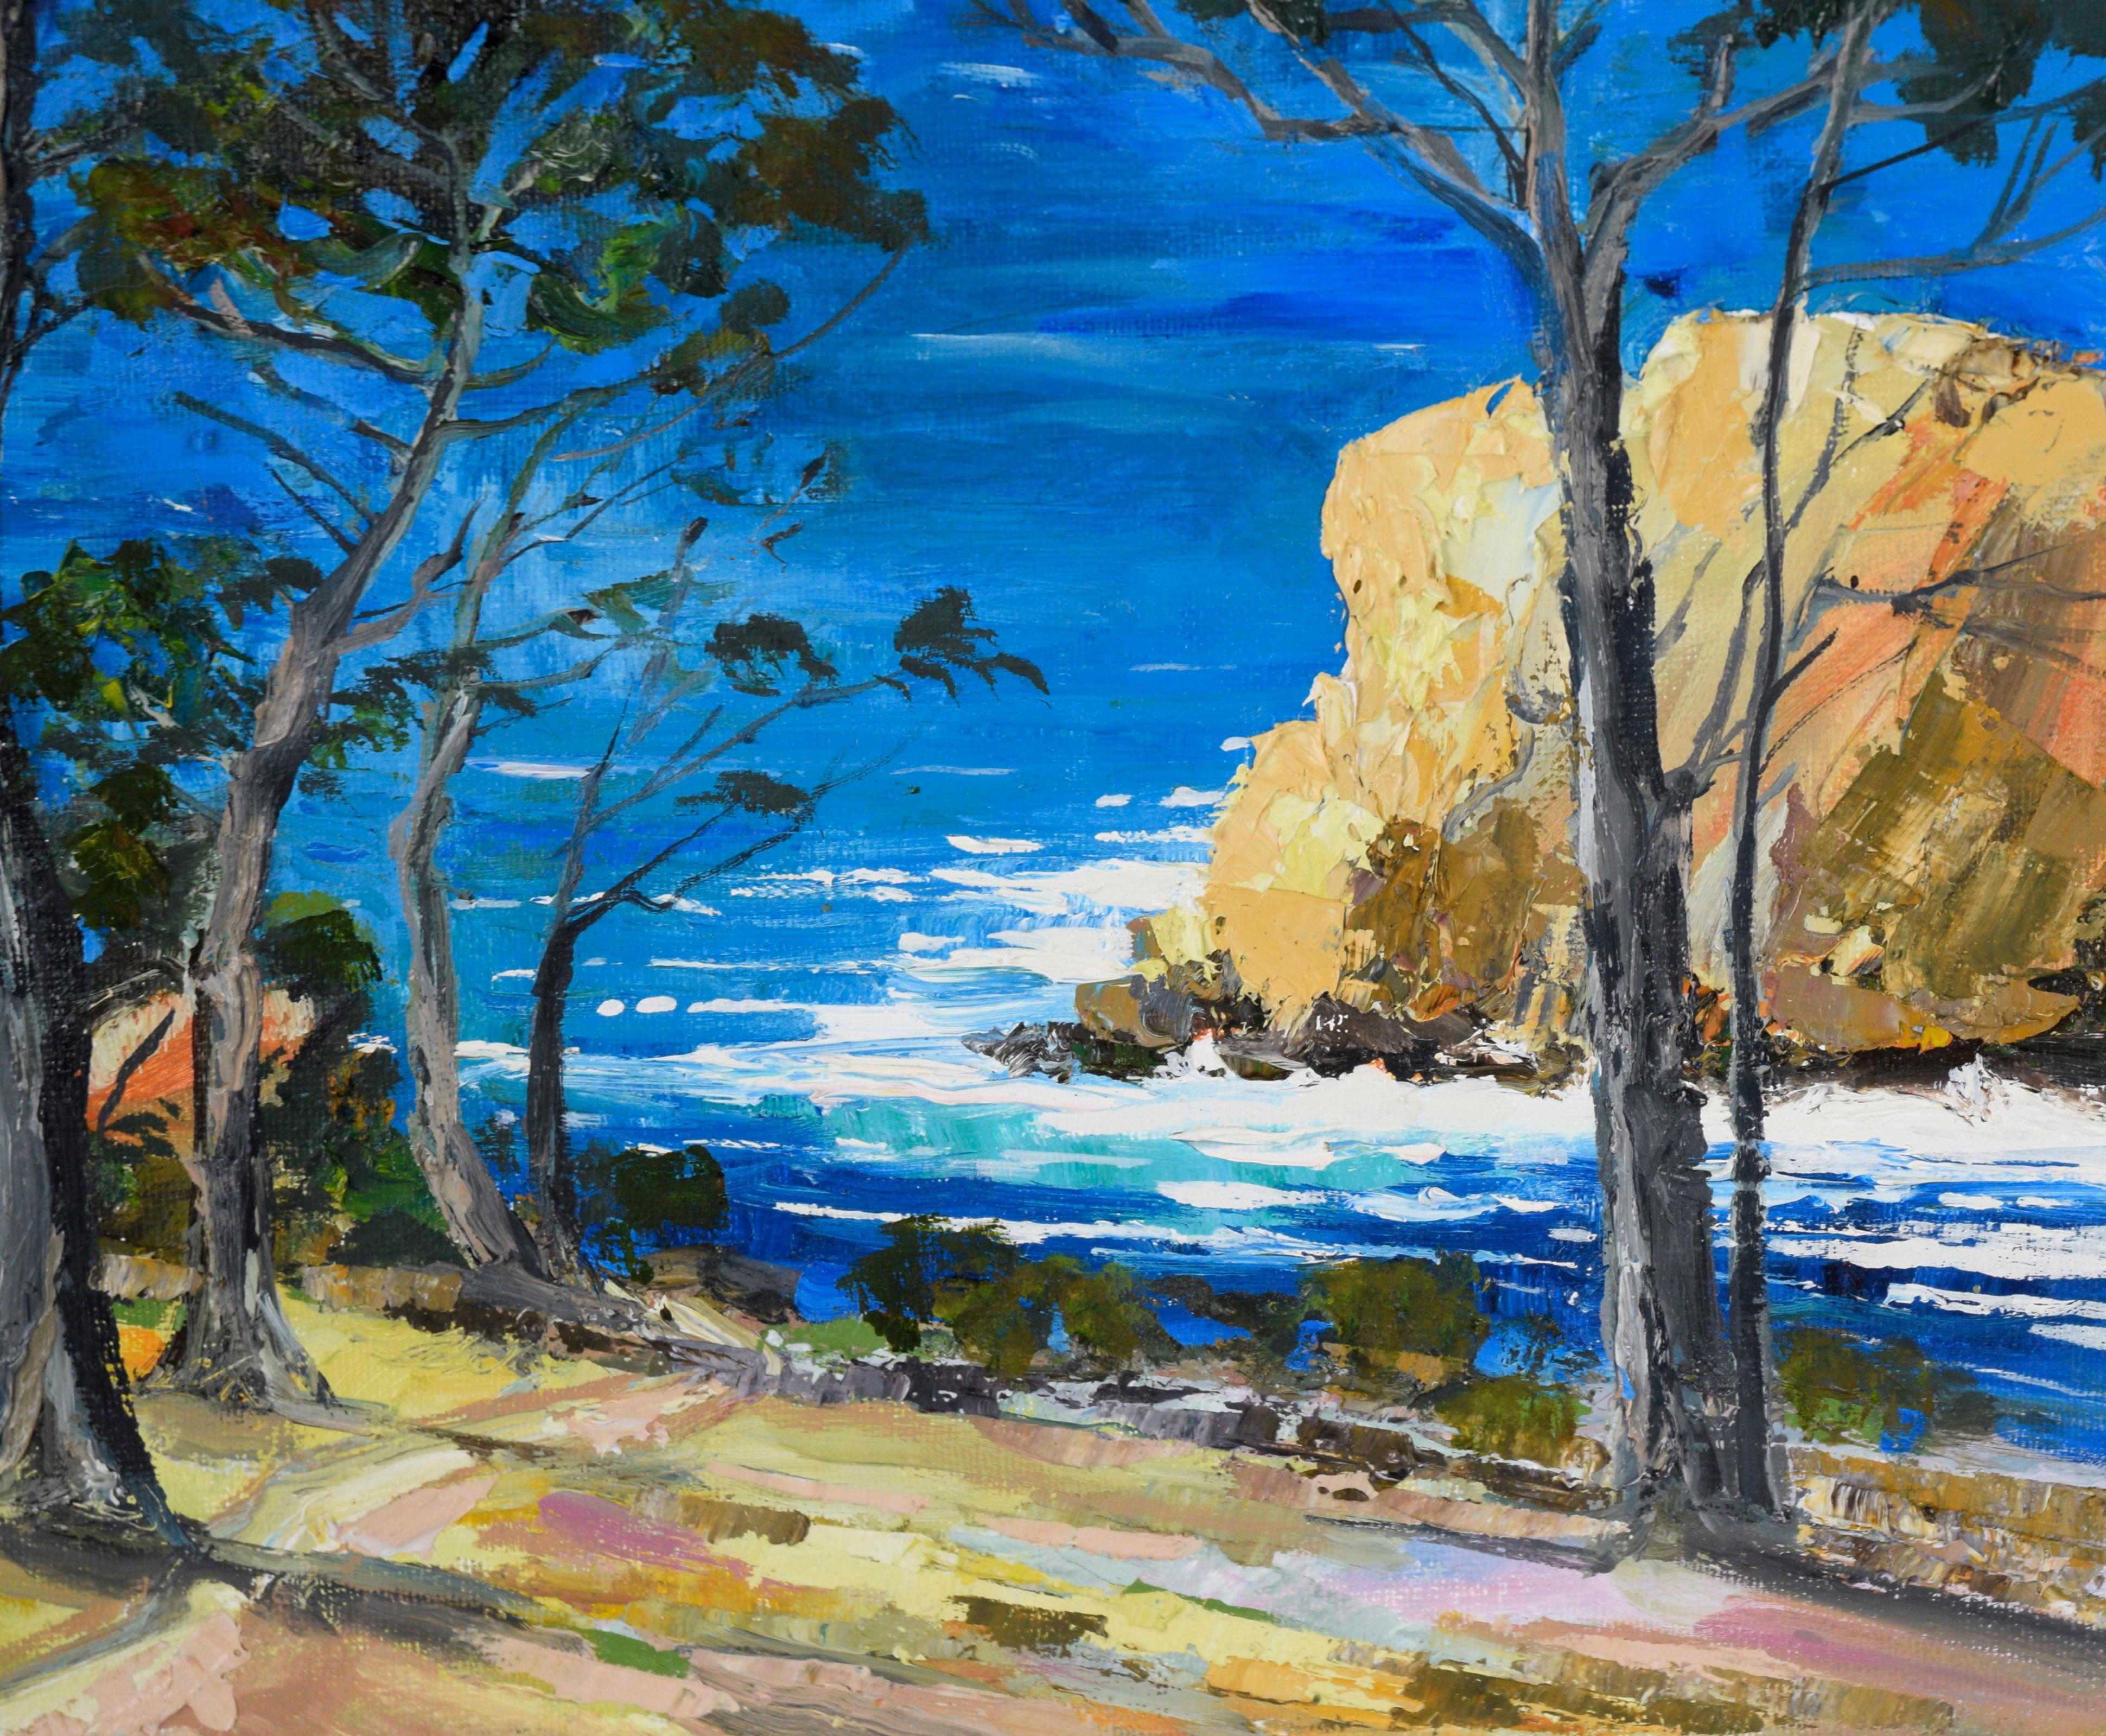 Path to the Ocean - Pacific Coast Seascape in Oil on Canvas

Gorgeous seascape of Big Sur coast by California artist Kathleen Murray (American, b. 1958). The viewer stands at a path leading down a hill towards the bright blue Pacific Ocean. Just